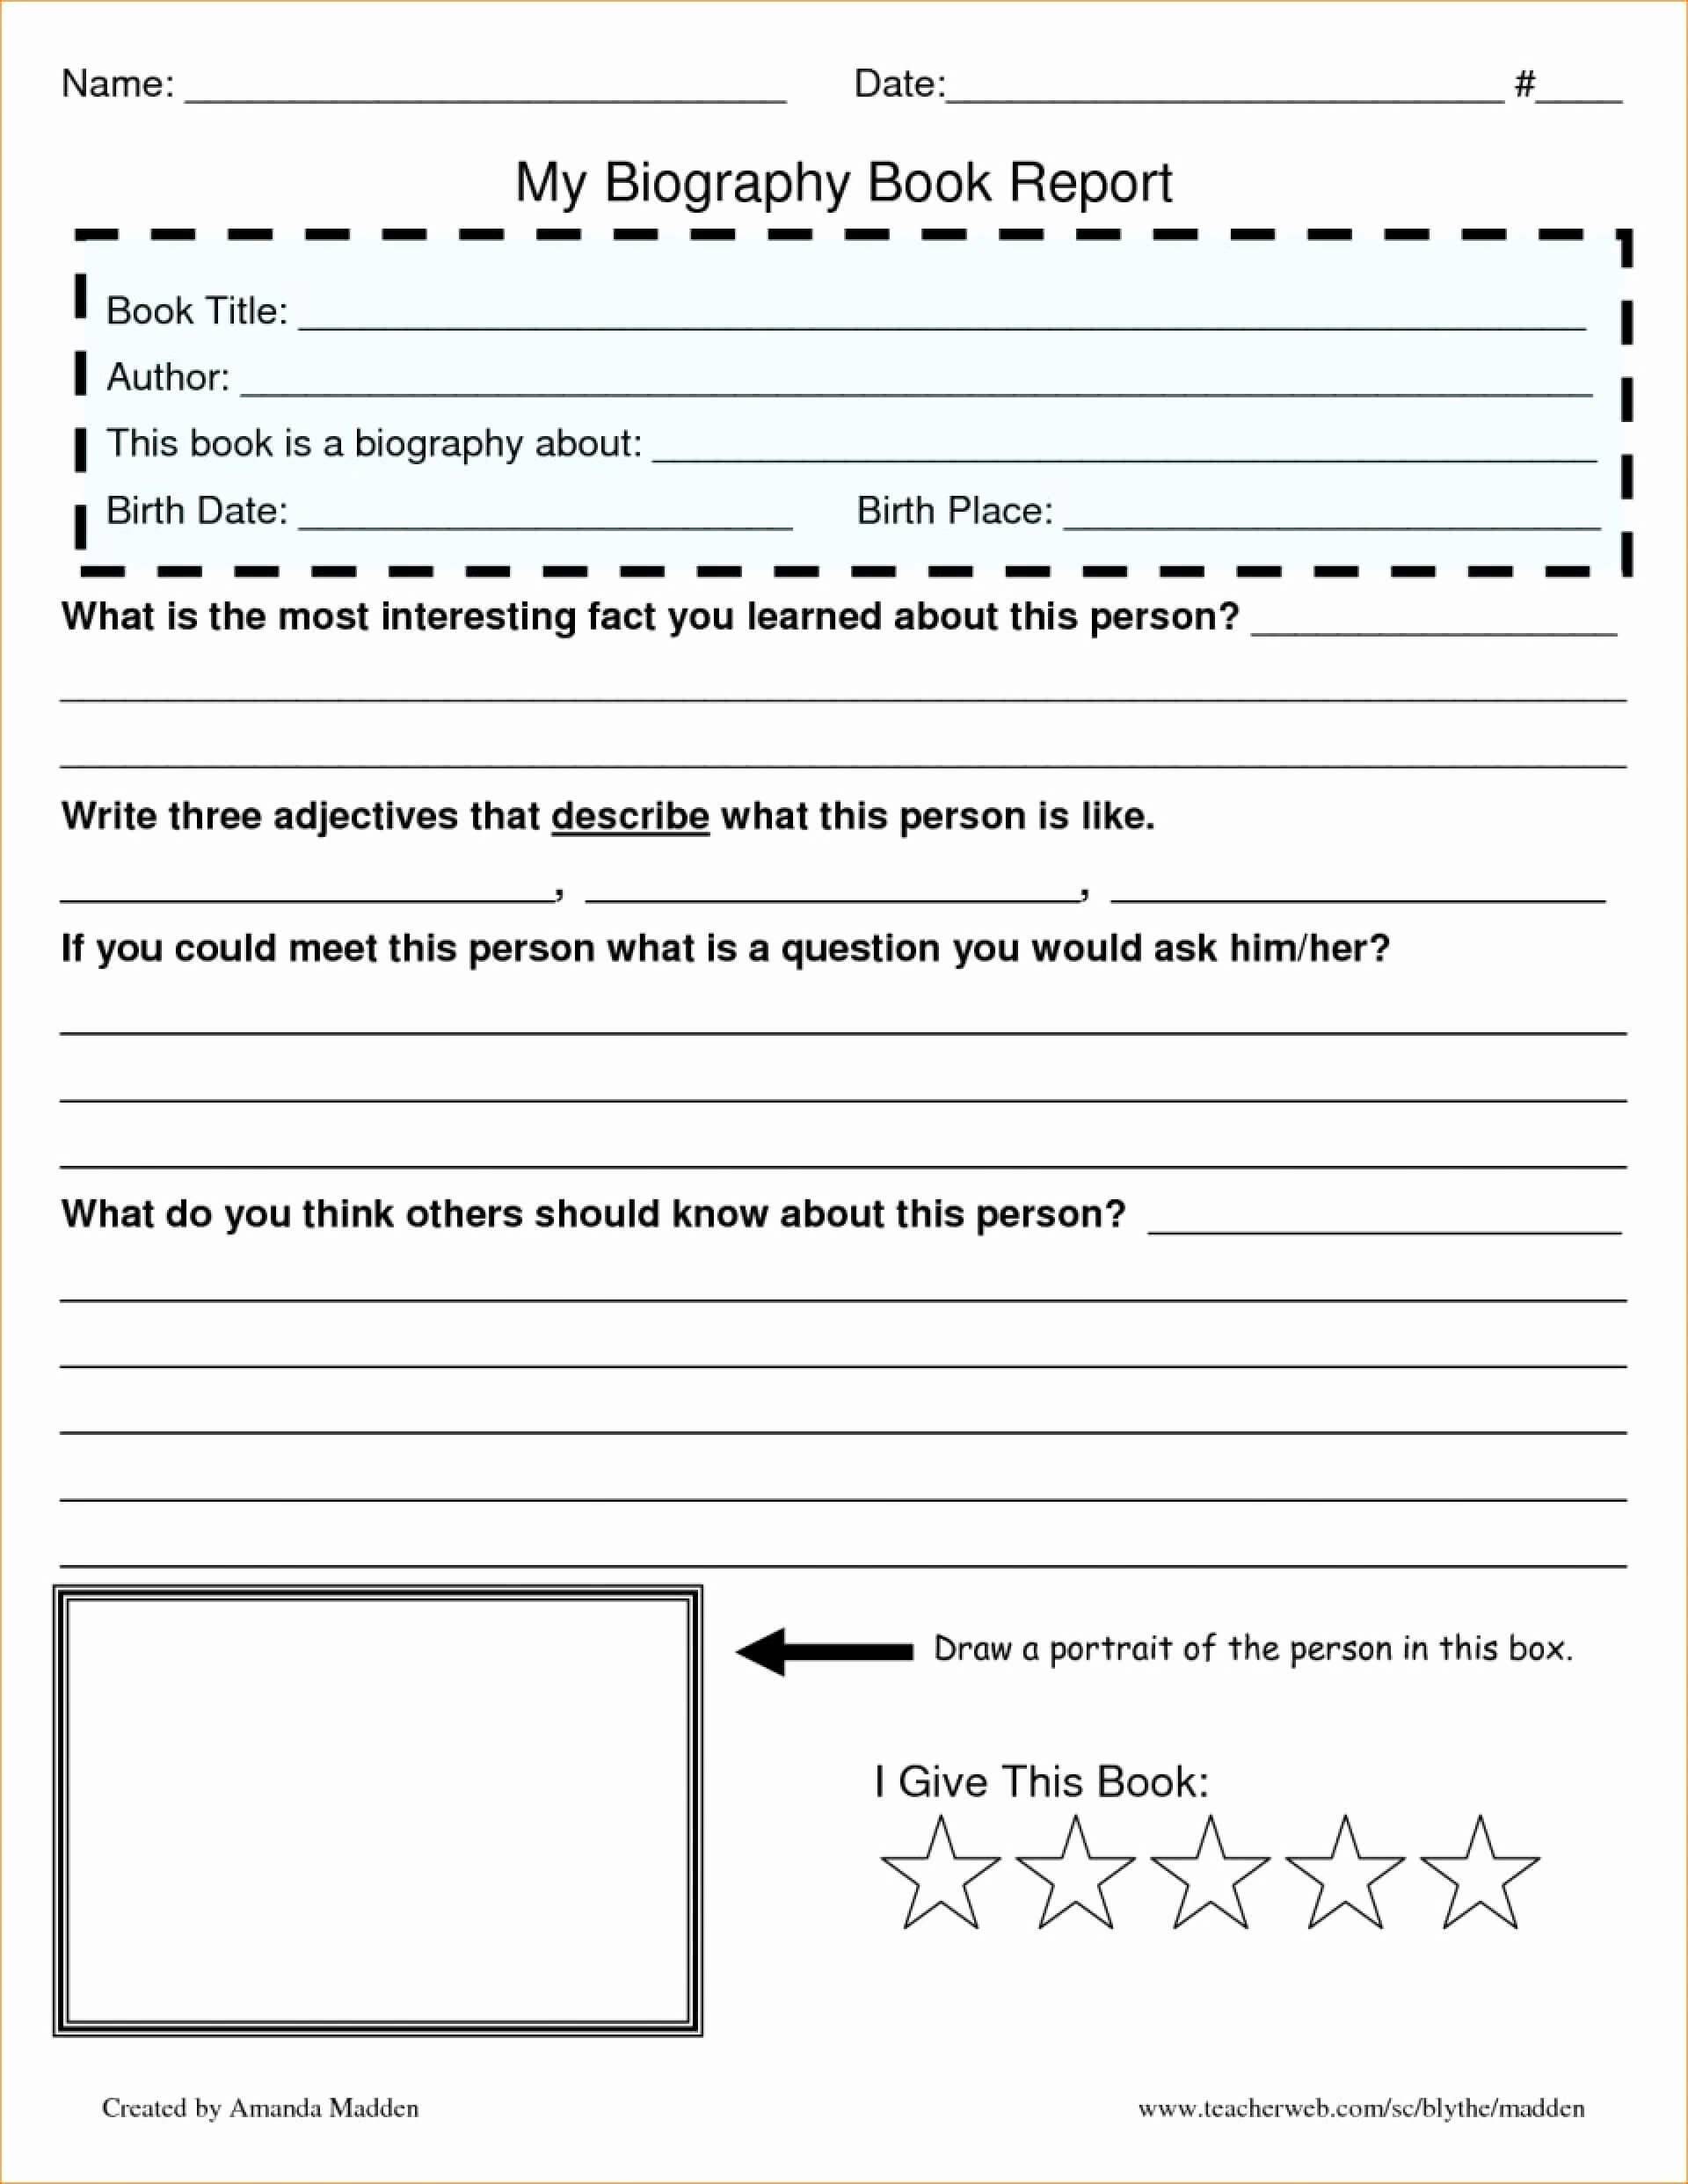 Formidable Biography Book Report Template Ideas 6Th Grade Intended For Book Report Template Middle School